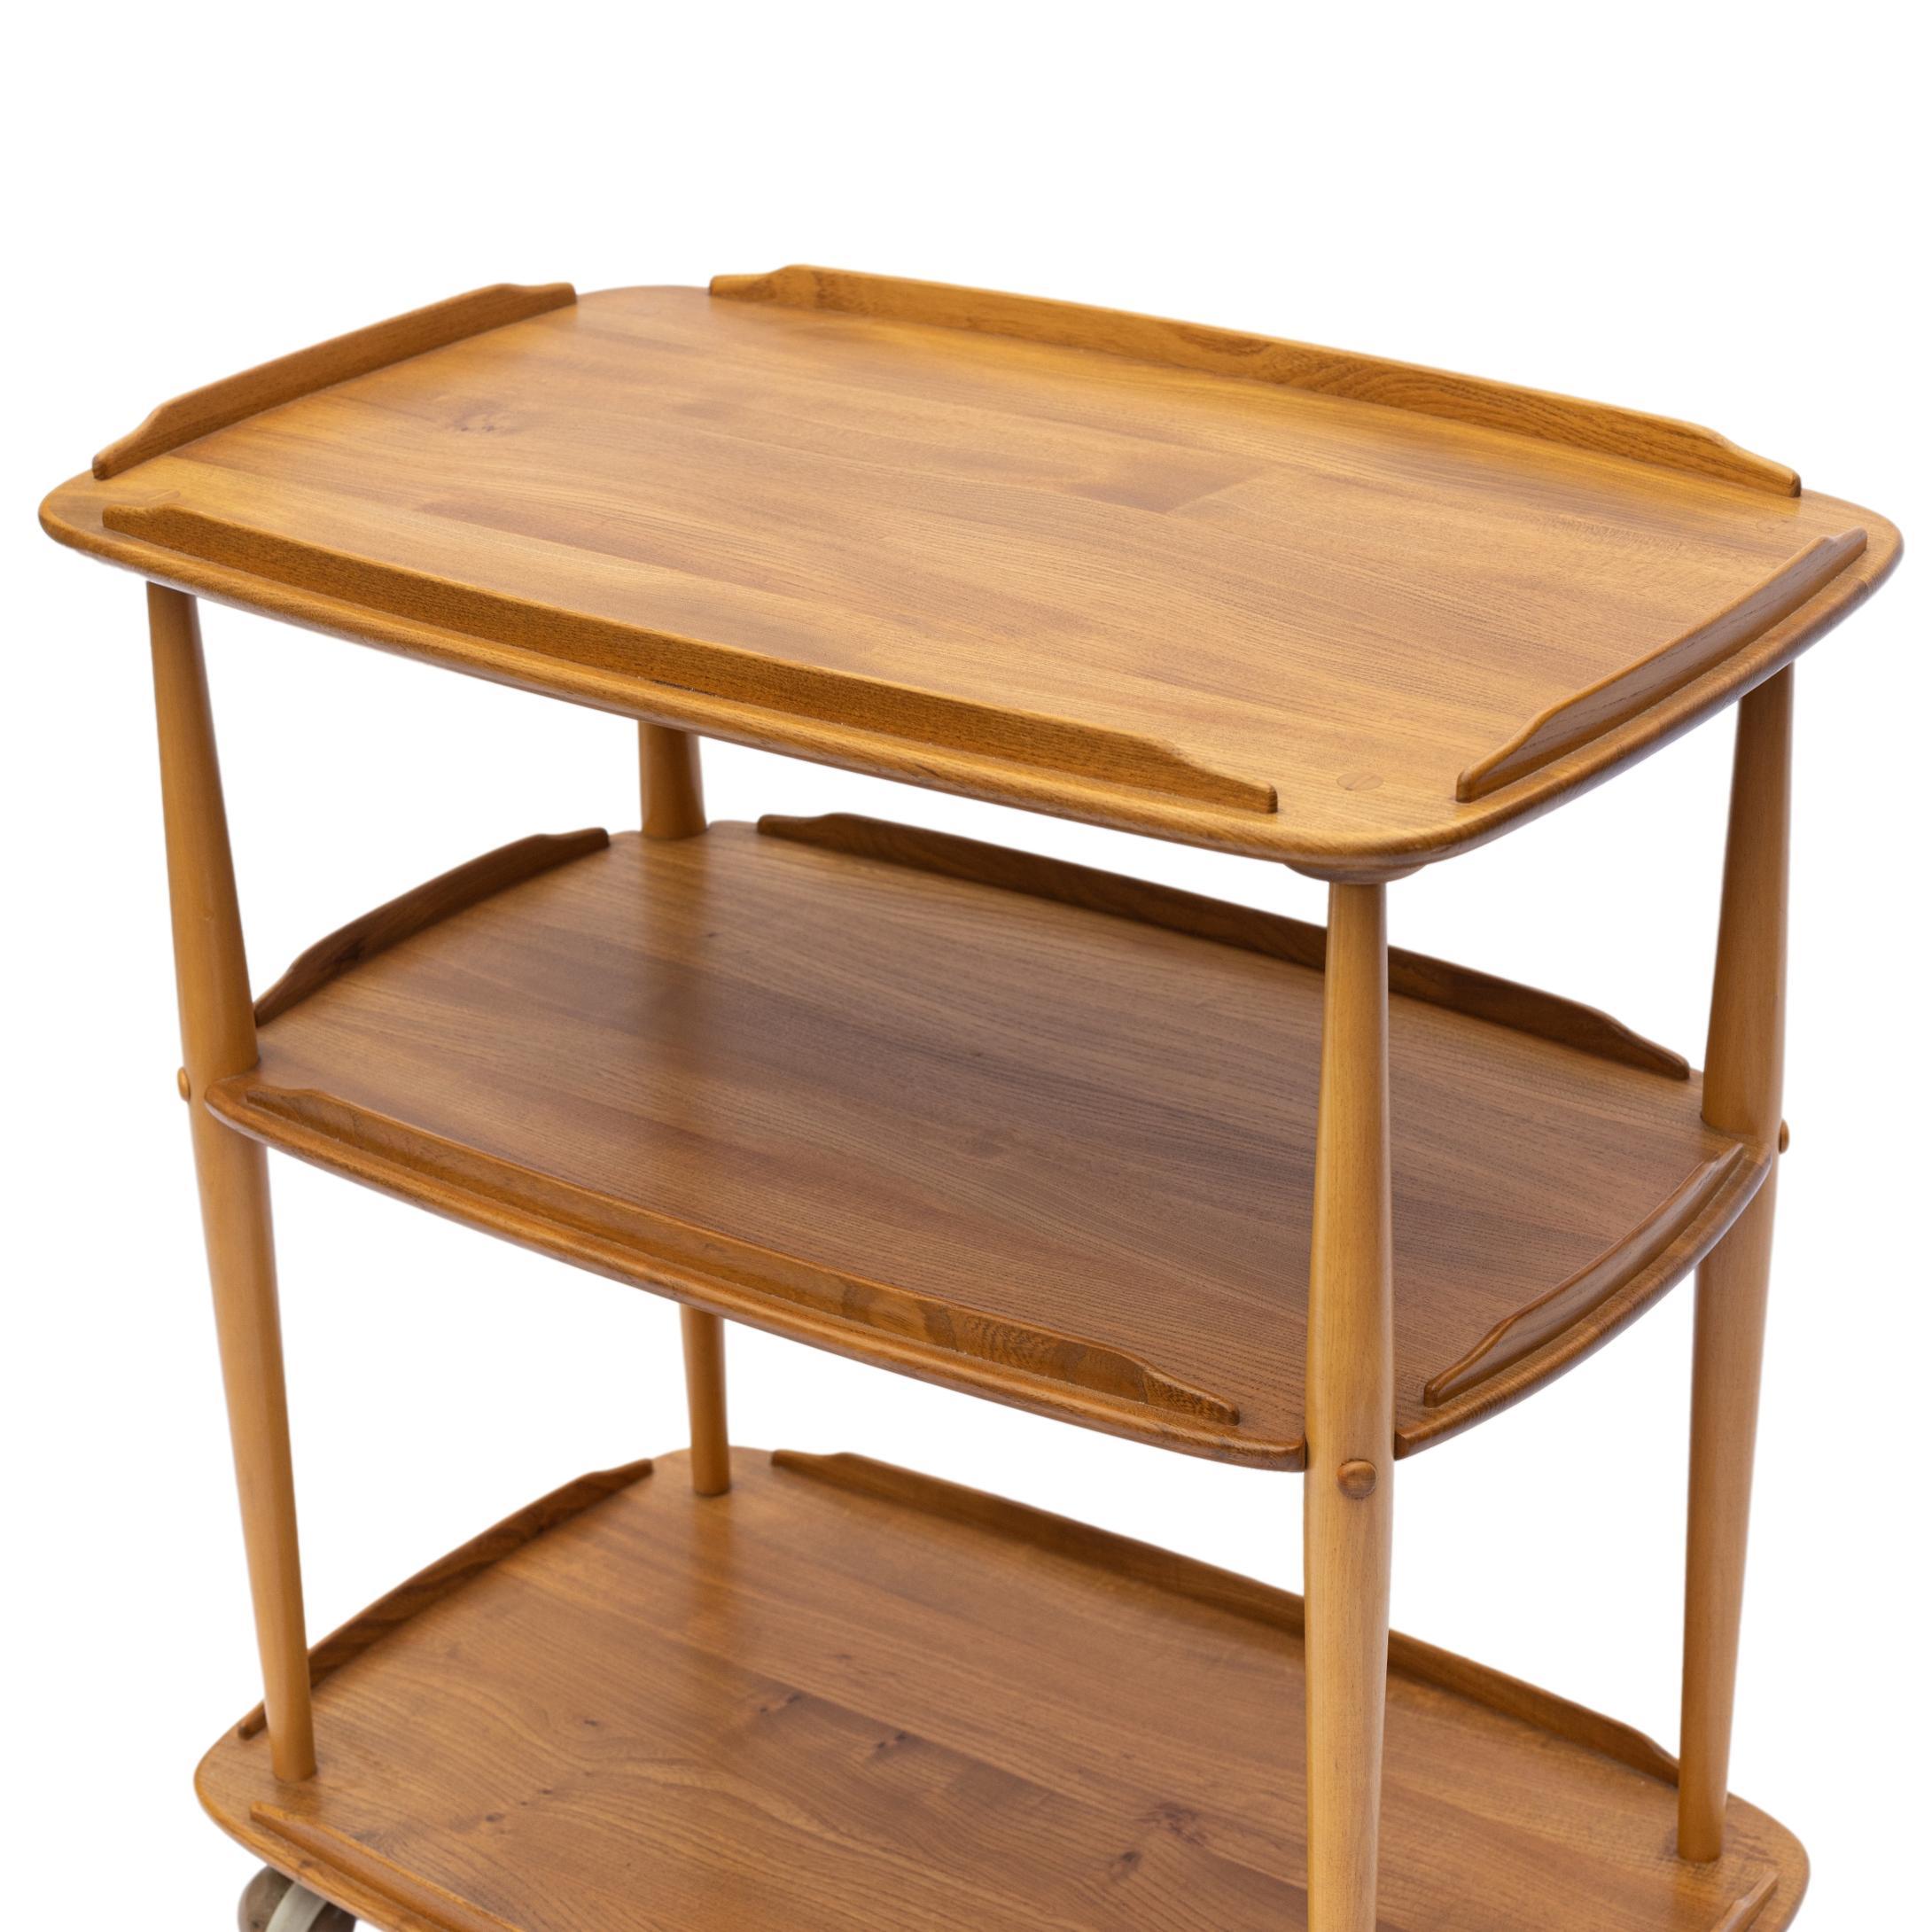 Mid-Century Modern ERCOL Elm and Beech Bar Trolley Designed by LUCIAN ERCOLANI, with three solid elm tiers with molded galleries, the beech posts with tenon and mortised joinery, on brass castors, English, ca. 1955 
Ercol was founded in 1920 by the